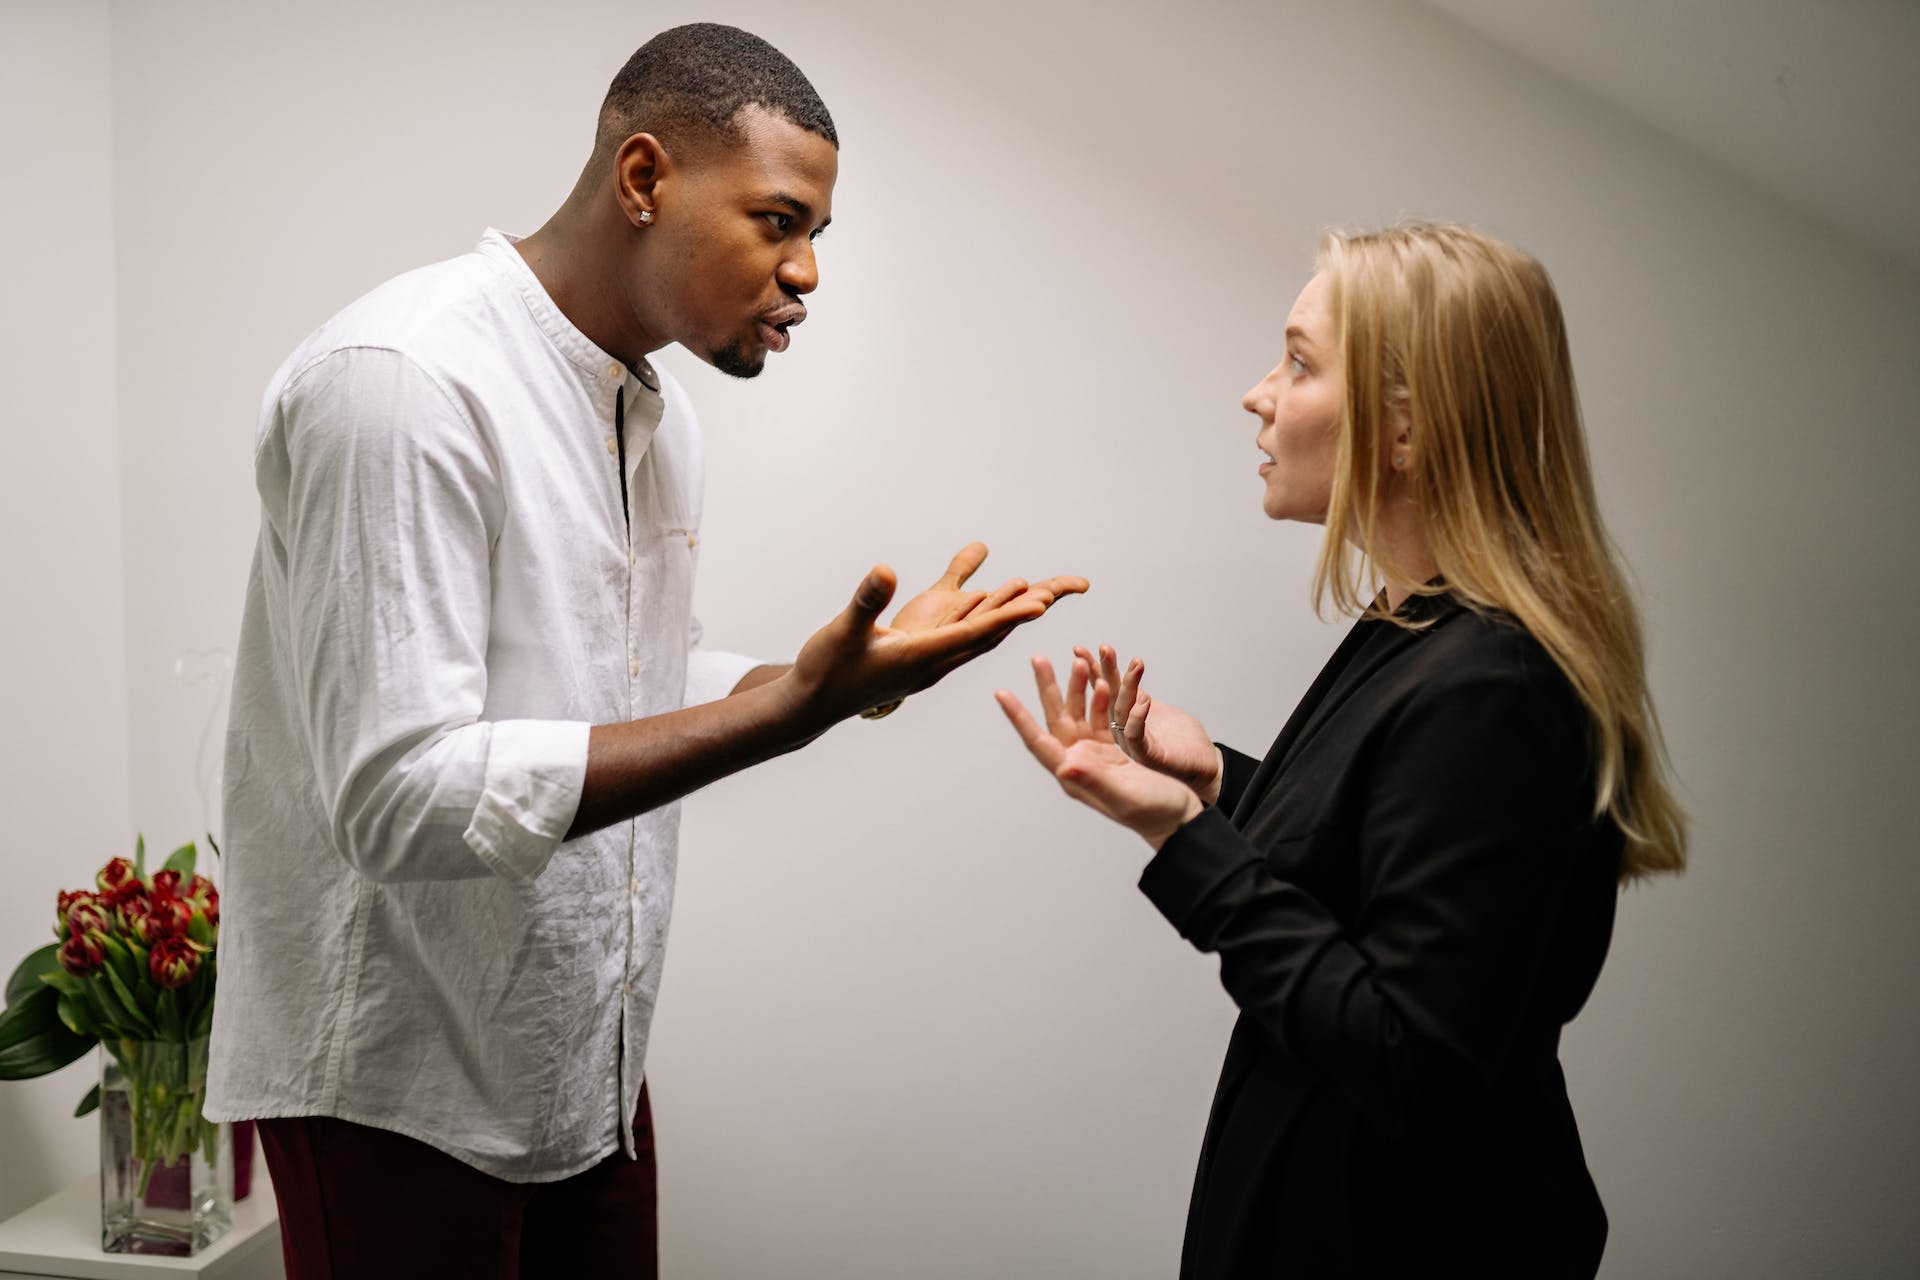 A man arguing with a woman | Source: Pexels